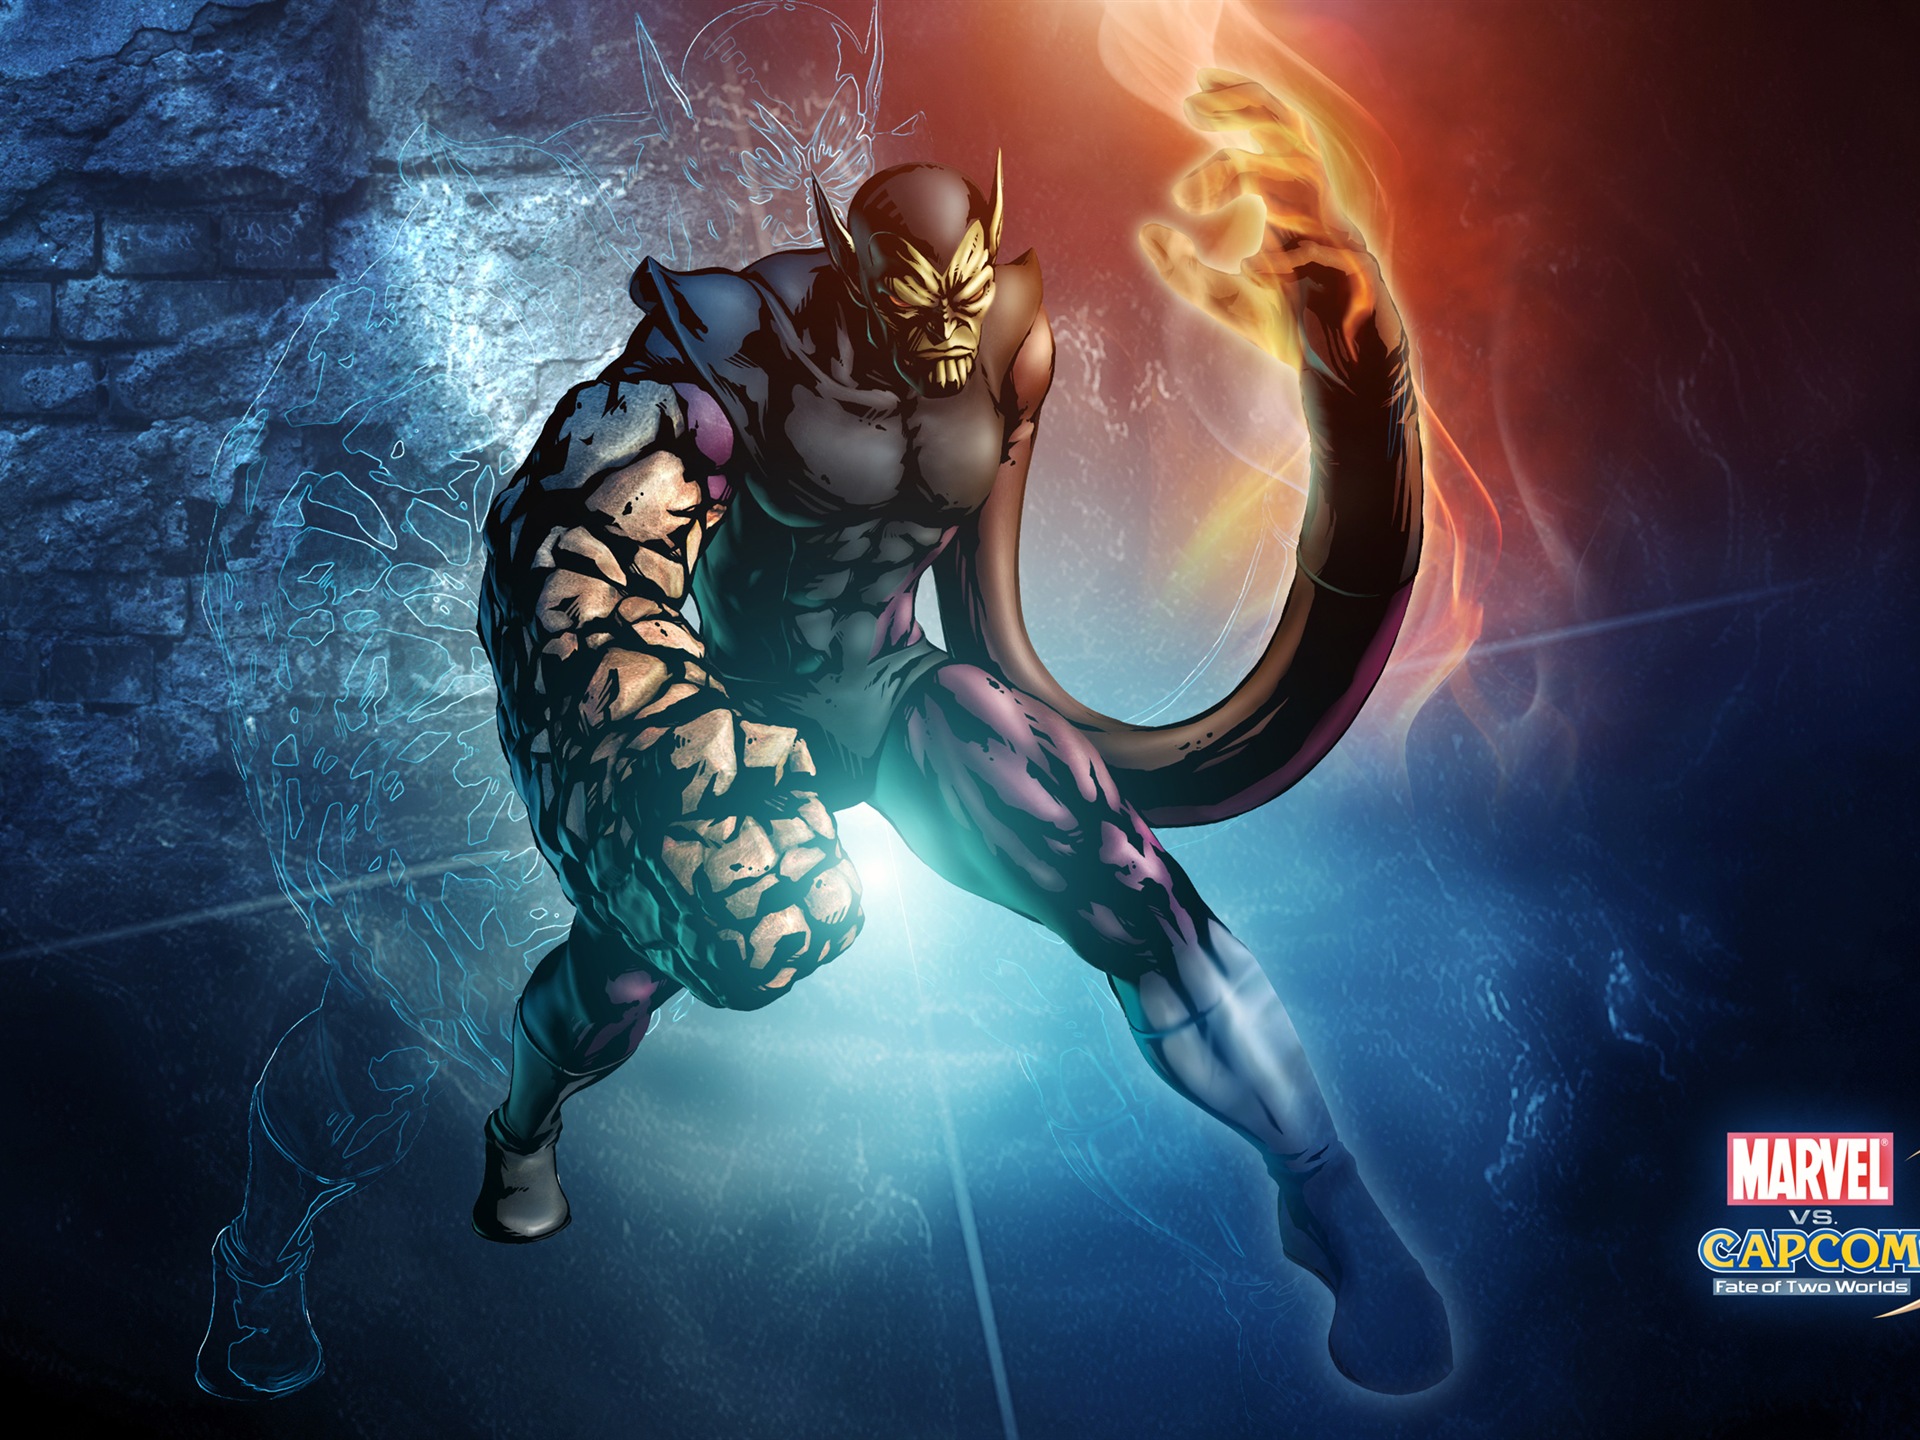 Marvel VS. Capcom 3: Fate of Two Worlds HD game wallpapers #24 - 1920x1440